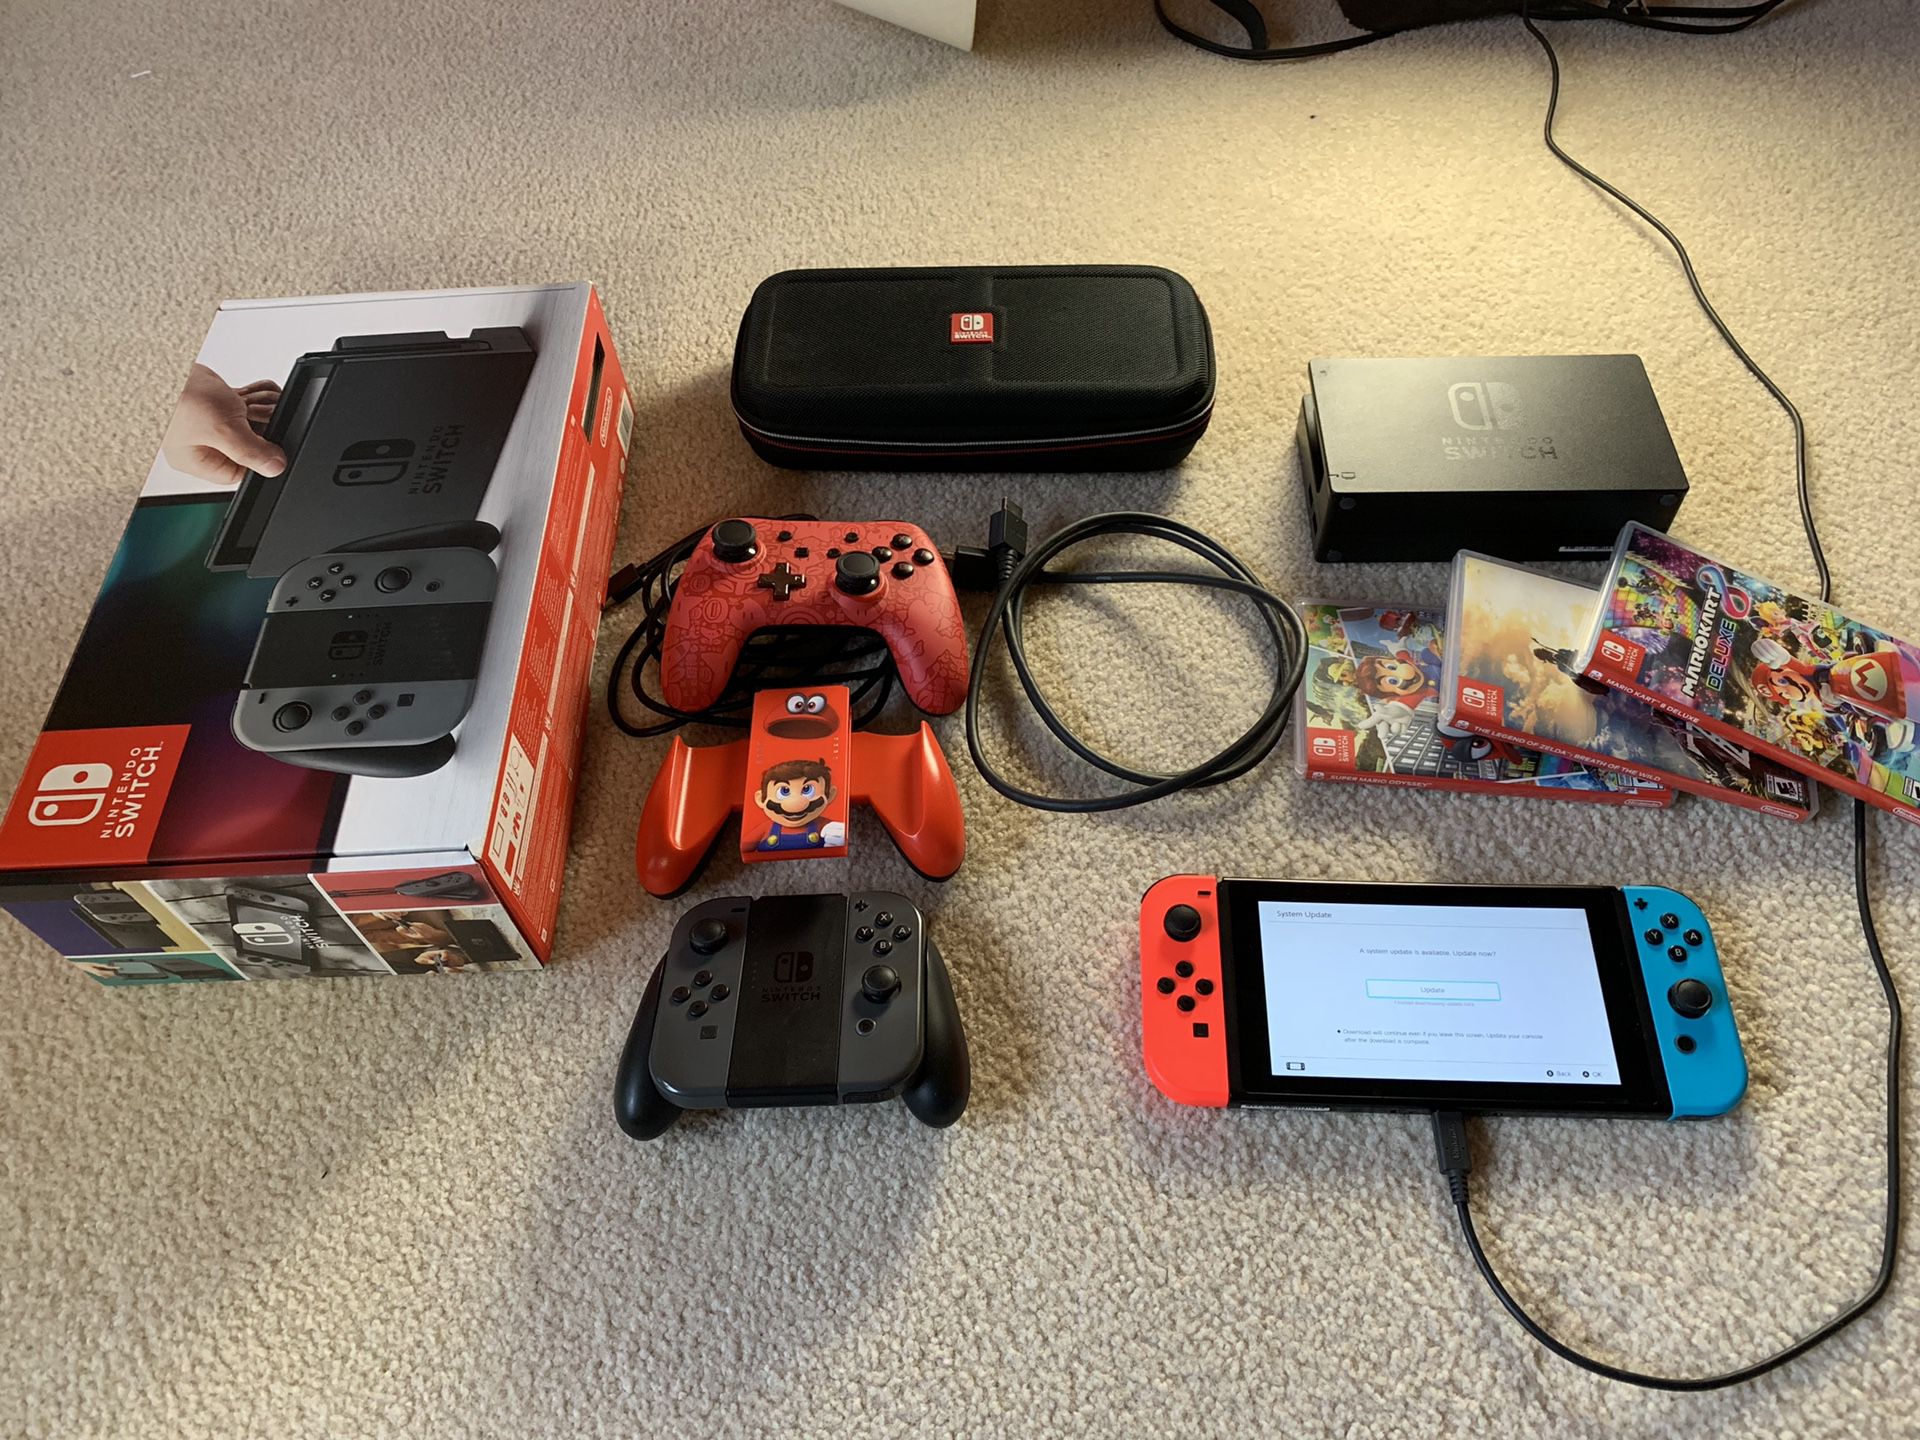 Nintendo Switch 3 Games, 3 Controllers, Case, Dock, and Cables